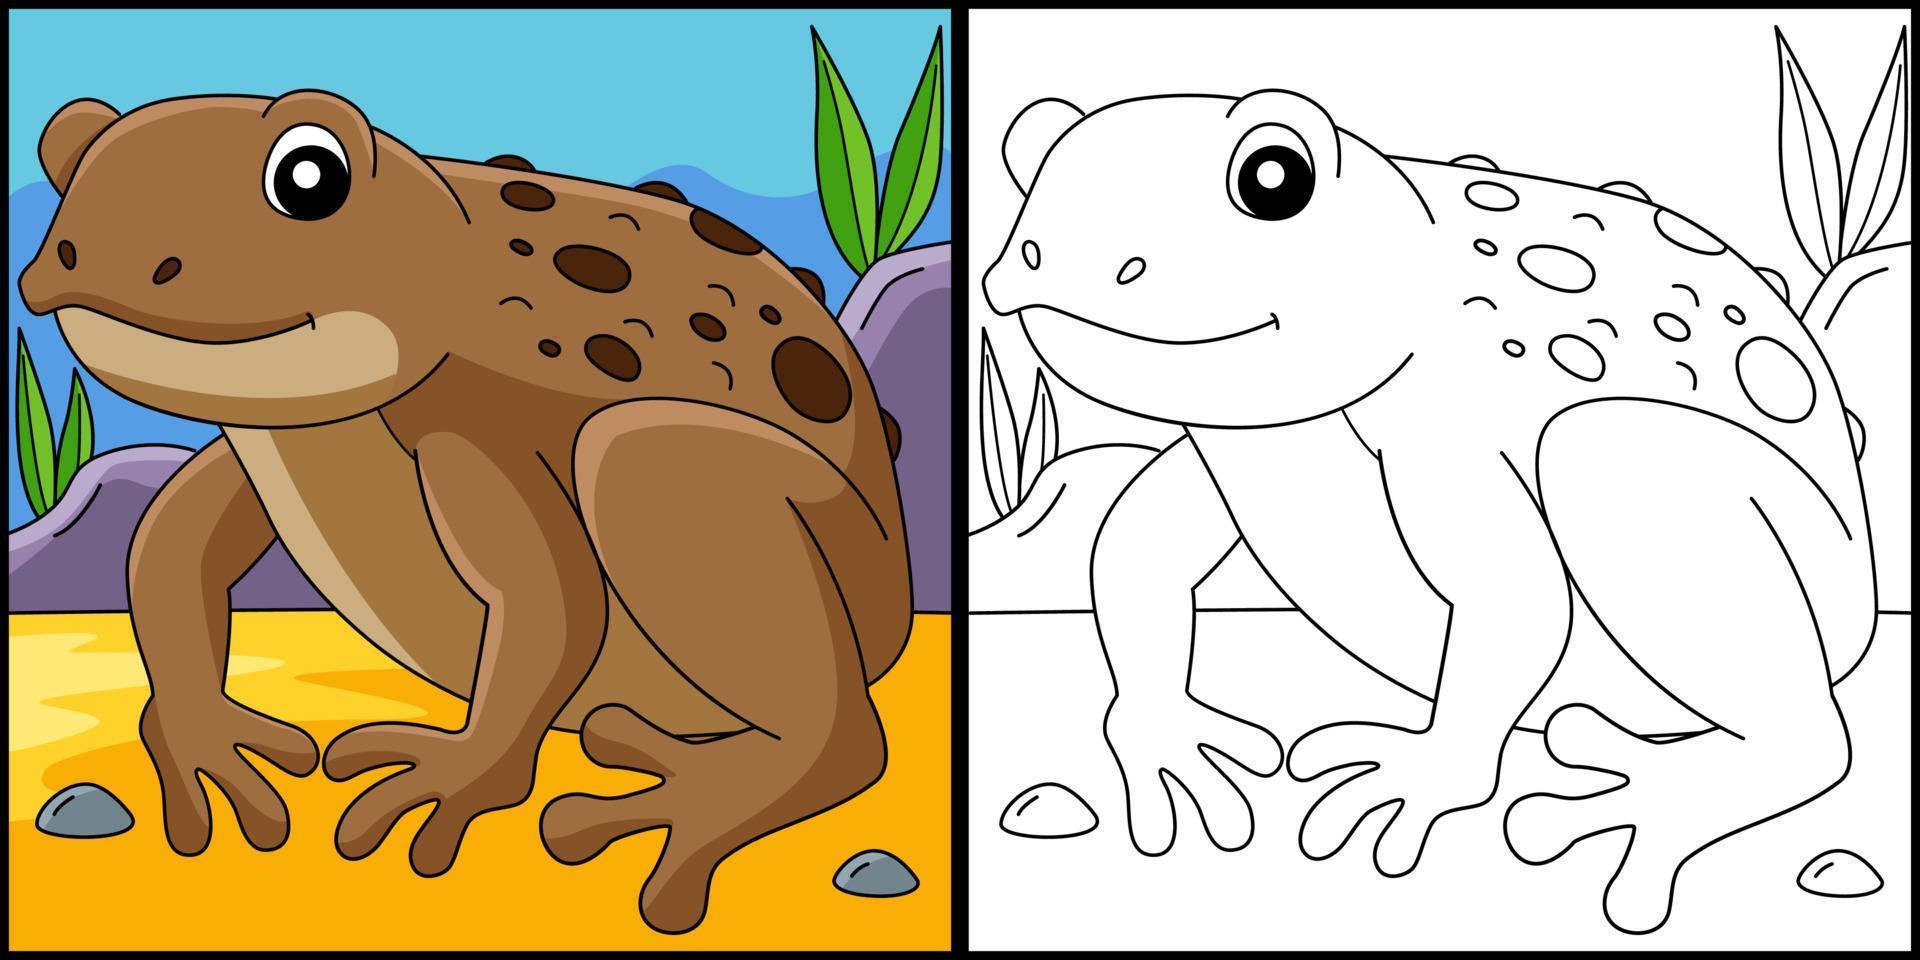 Cane Toad Frog Animal Coloring Page Illustration vector